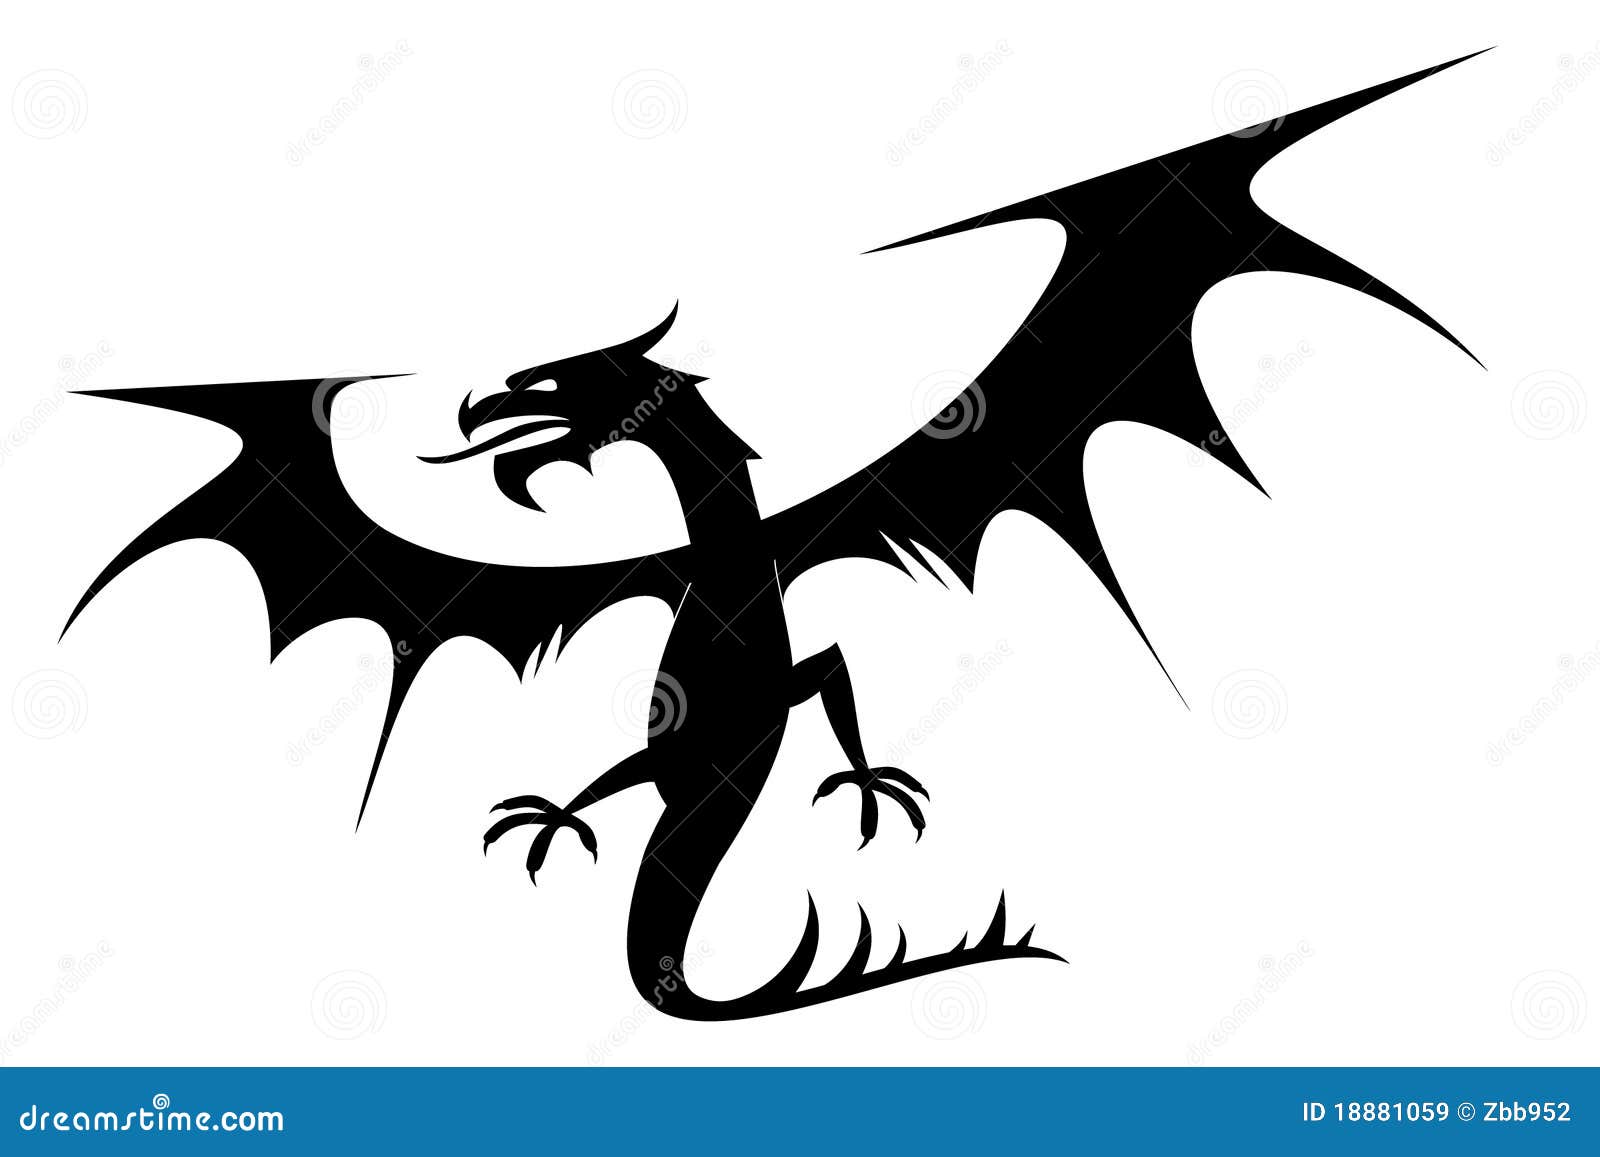 Dragon Royalty Free Stock Images - Image: 18881059